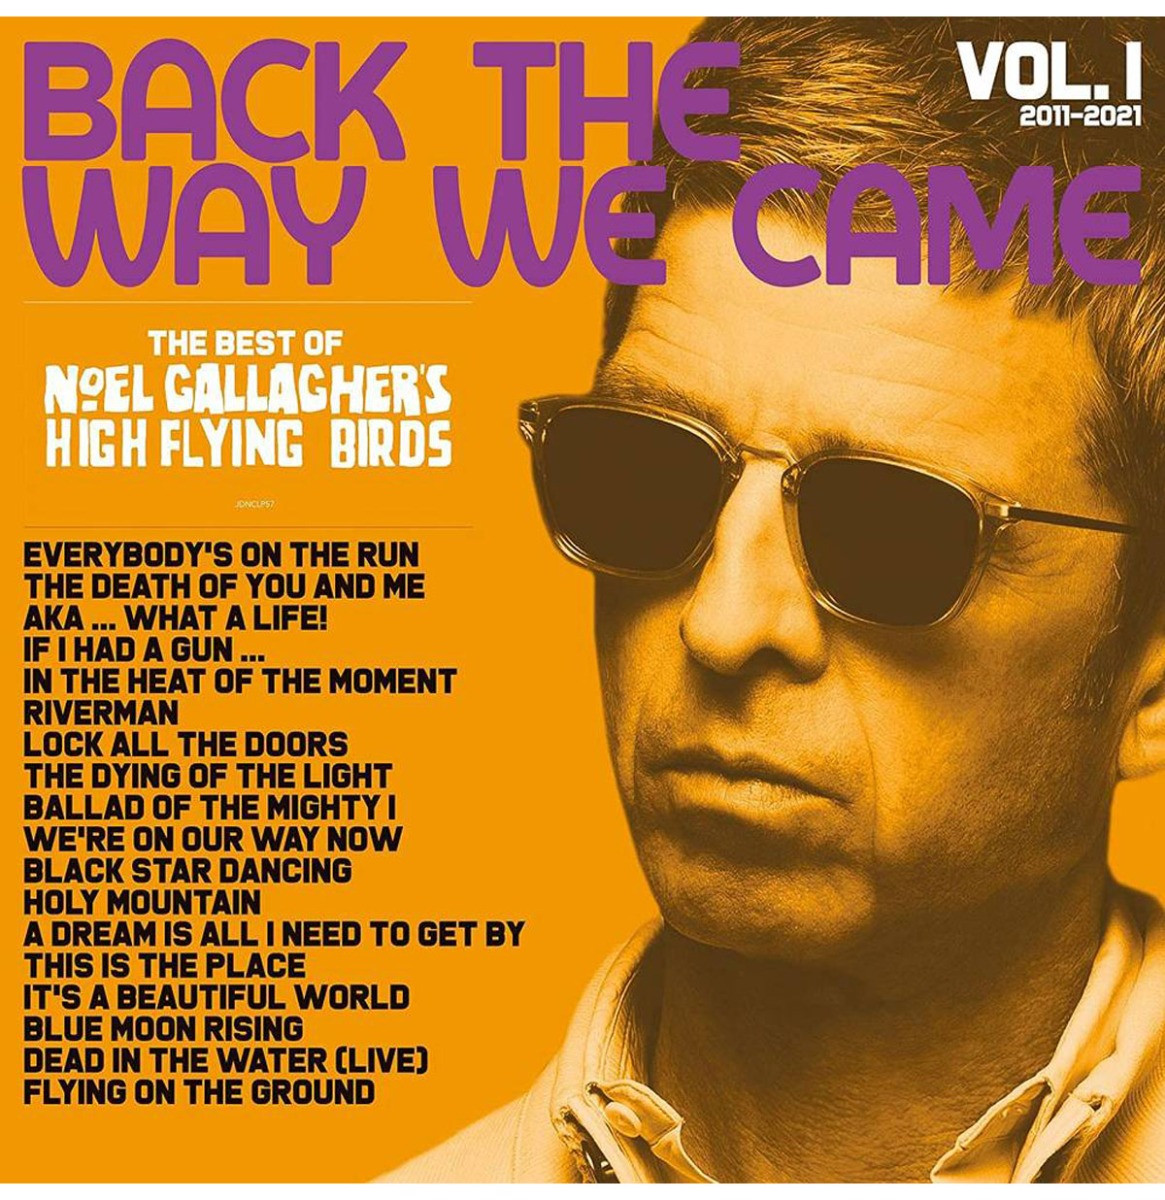 Noel - Gallagher&apos;s - Back The Way We Came Vol. 1 (2011-2021) 2LP